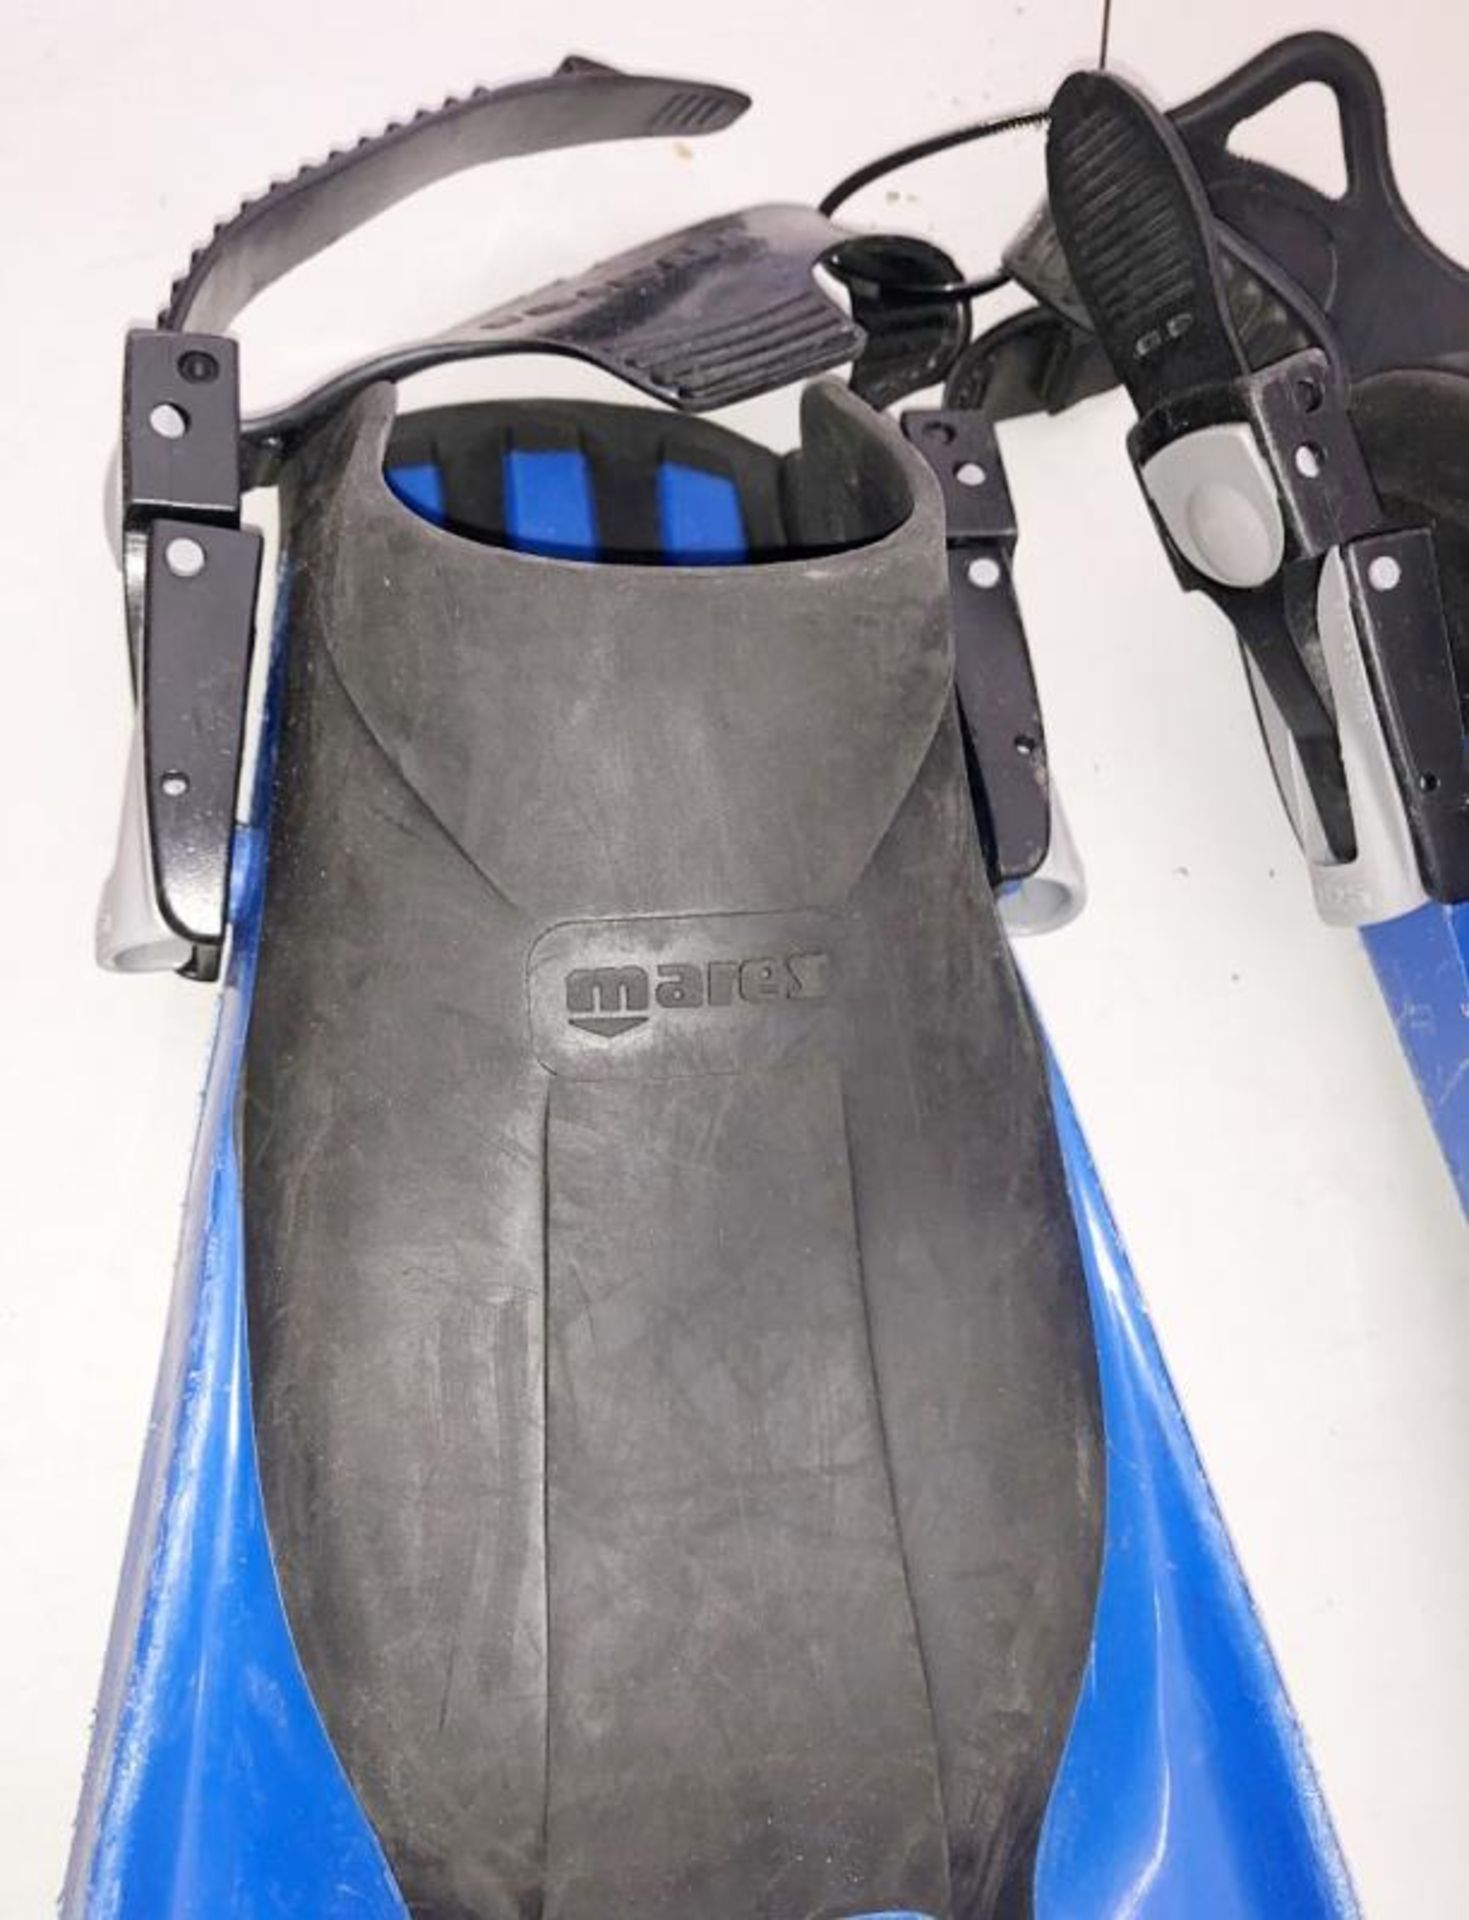 5 x Pairs Of Branded Diving Fins - Ref: NS175, NS176, NS177, NS178, NS179, NS180, NS181, NS182, NS18 - Image 3 of 17